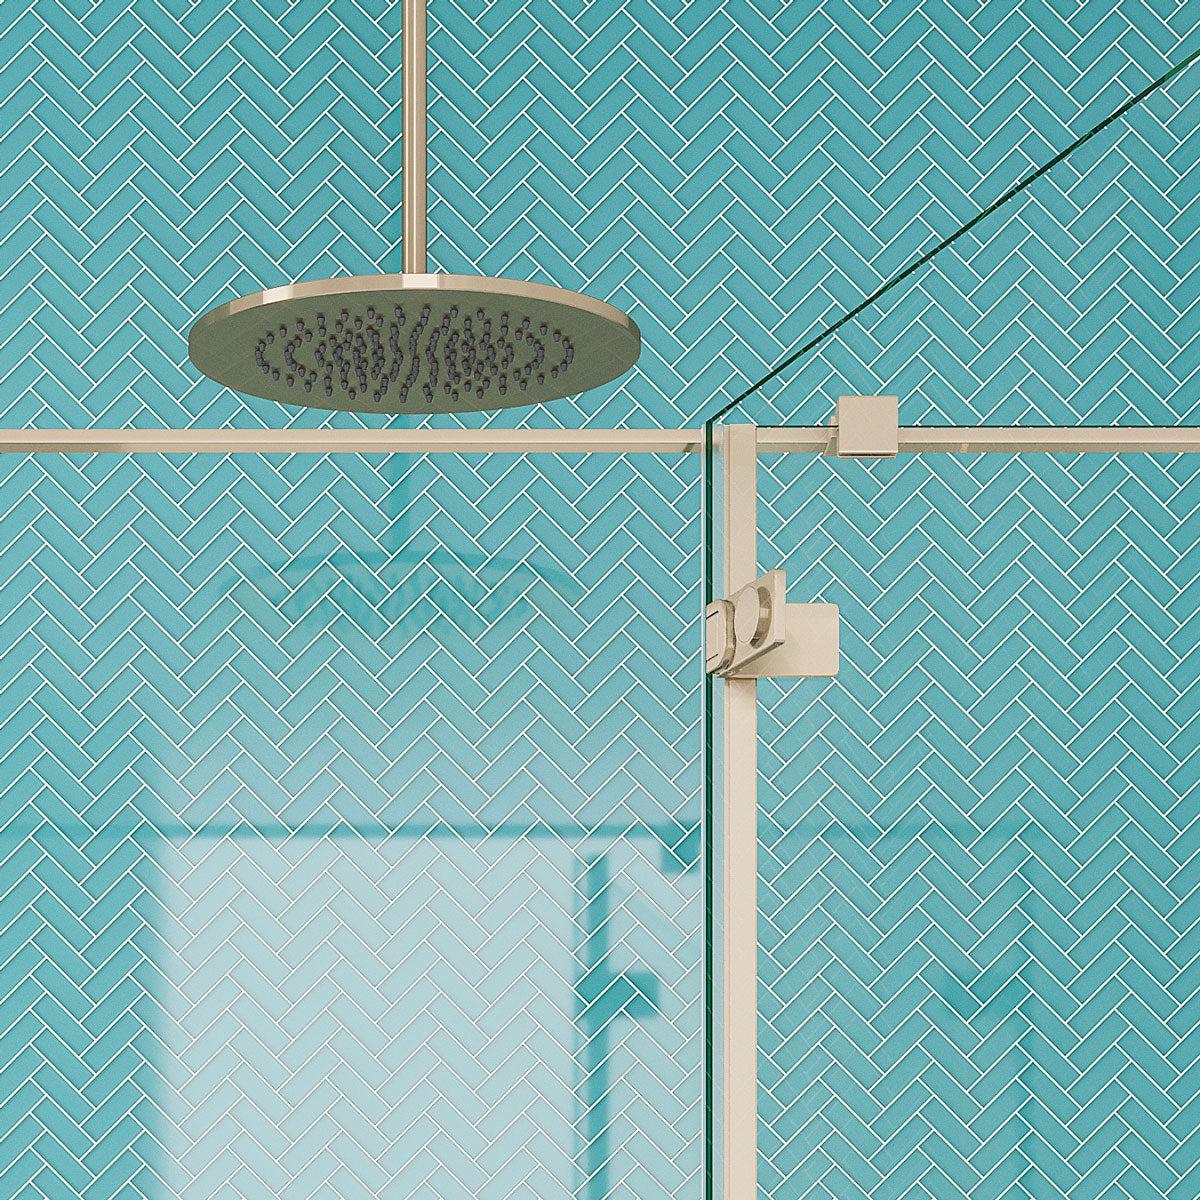 Golden Shower Head with Turquoise Herringbone Glass Tile Wall